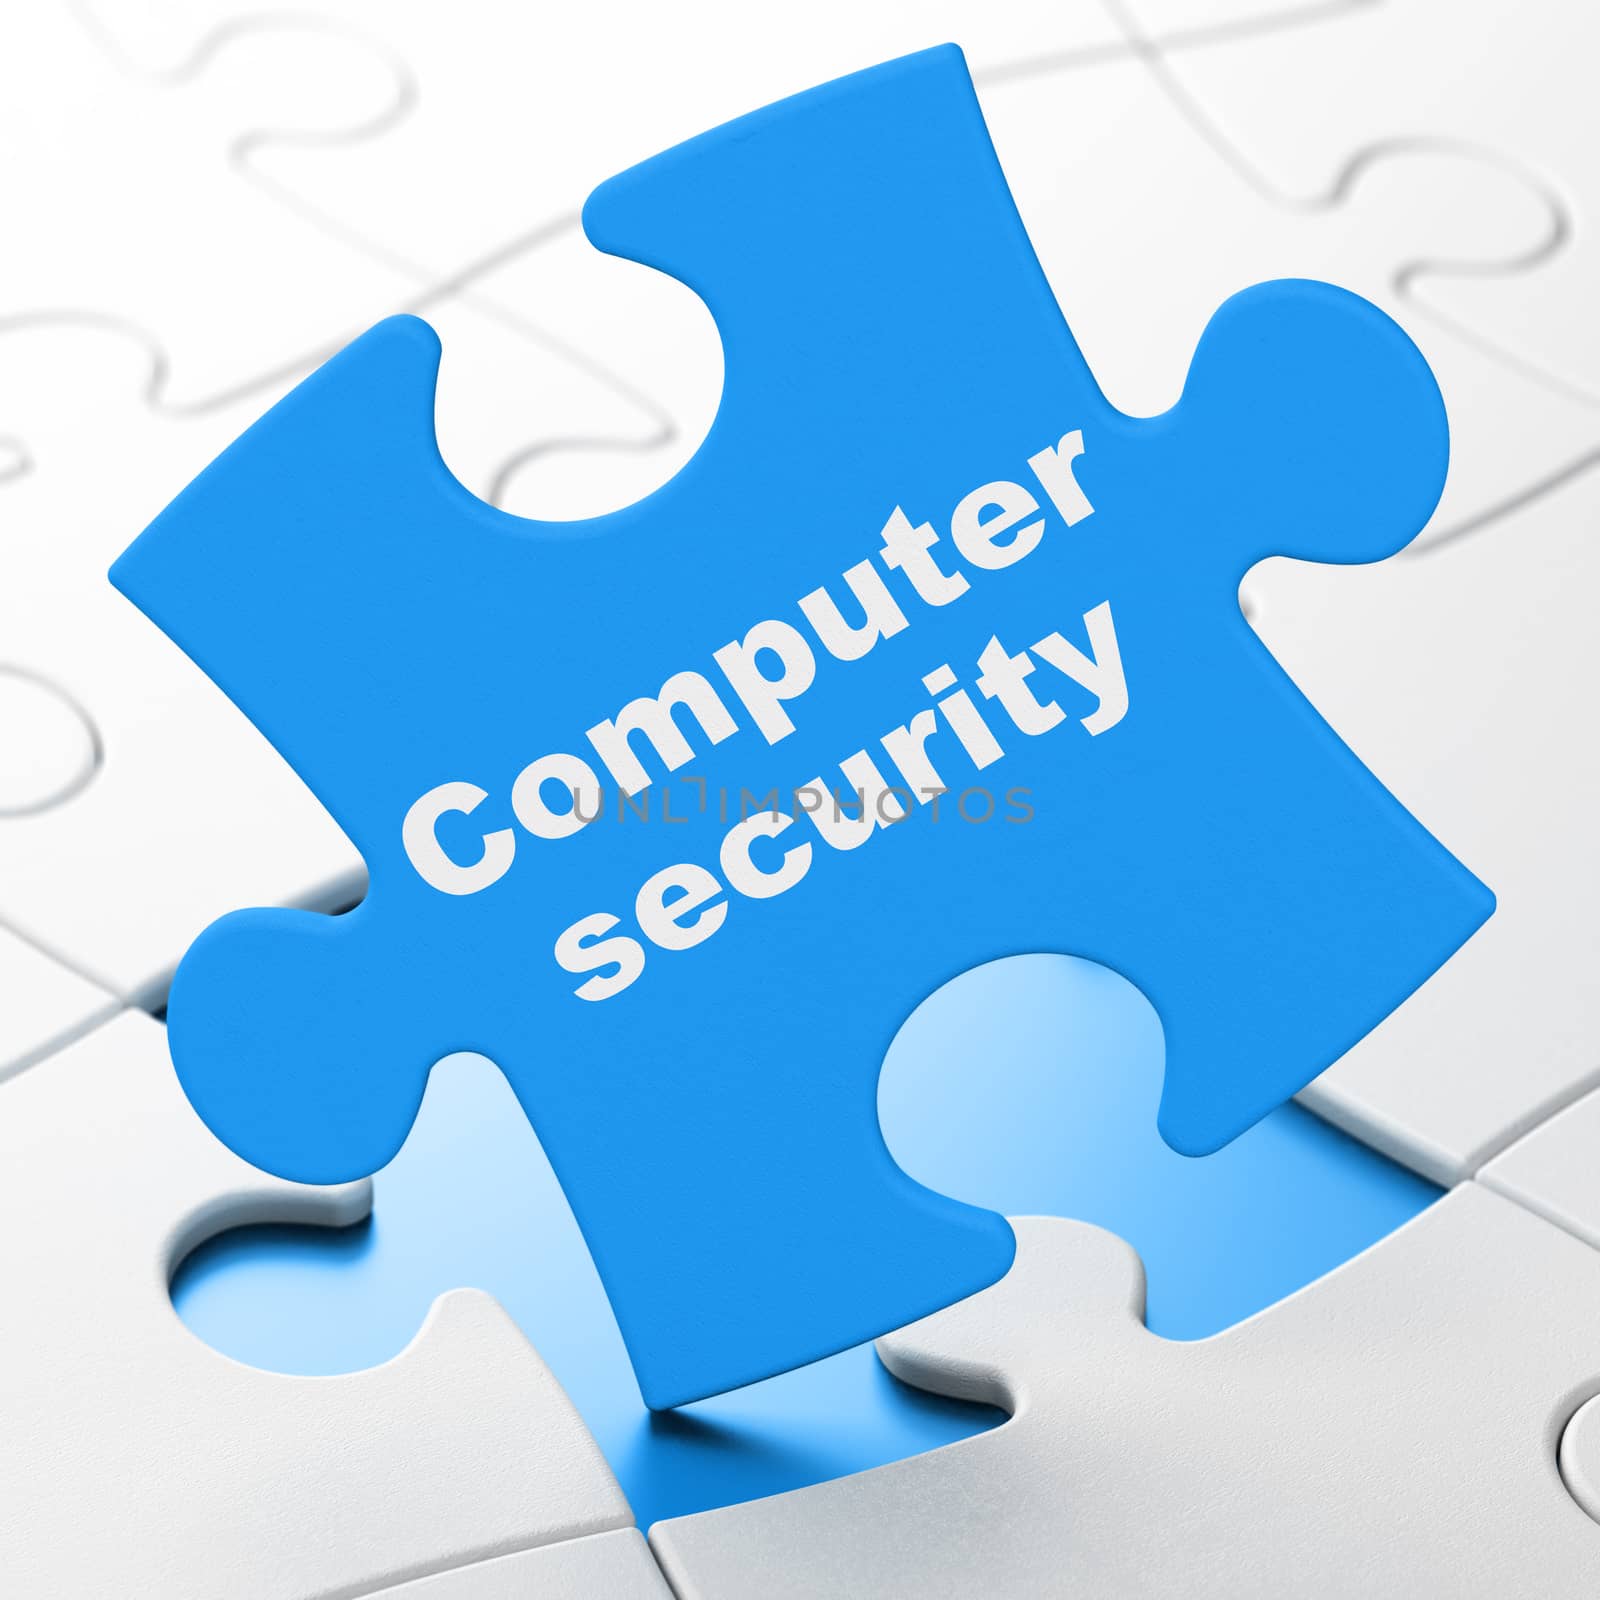 Protection concept: Computer Security on Blue puzzle pieces background, 3D rendering